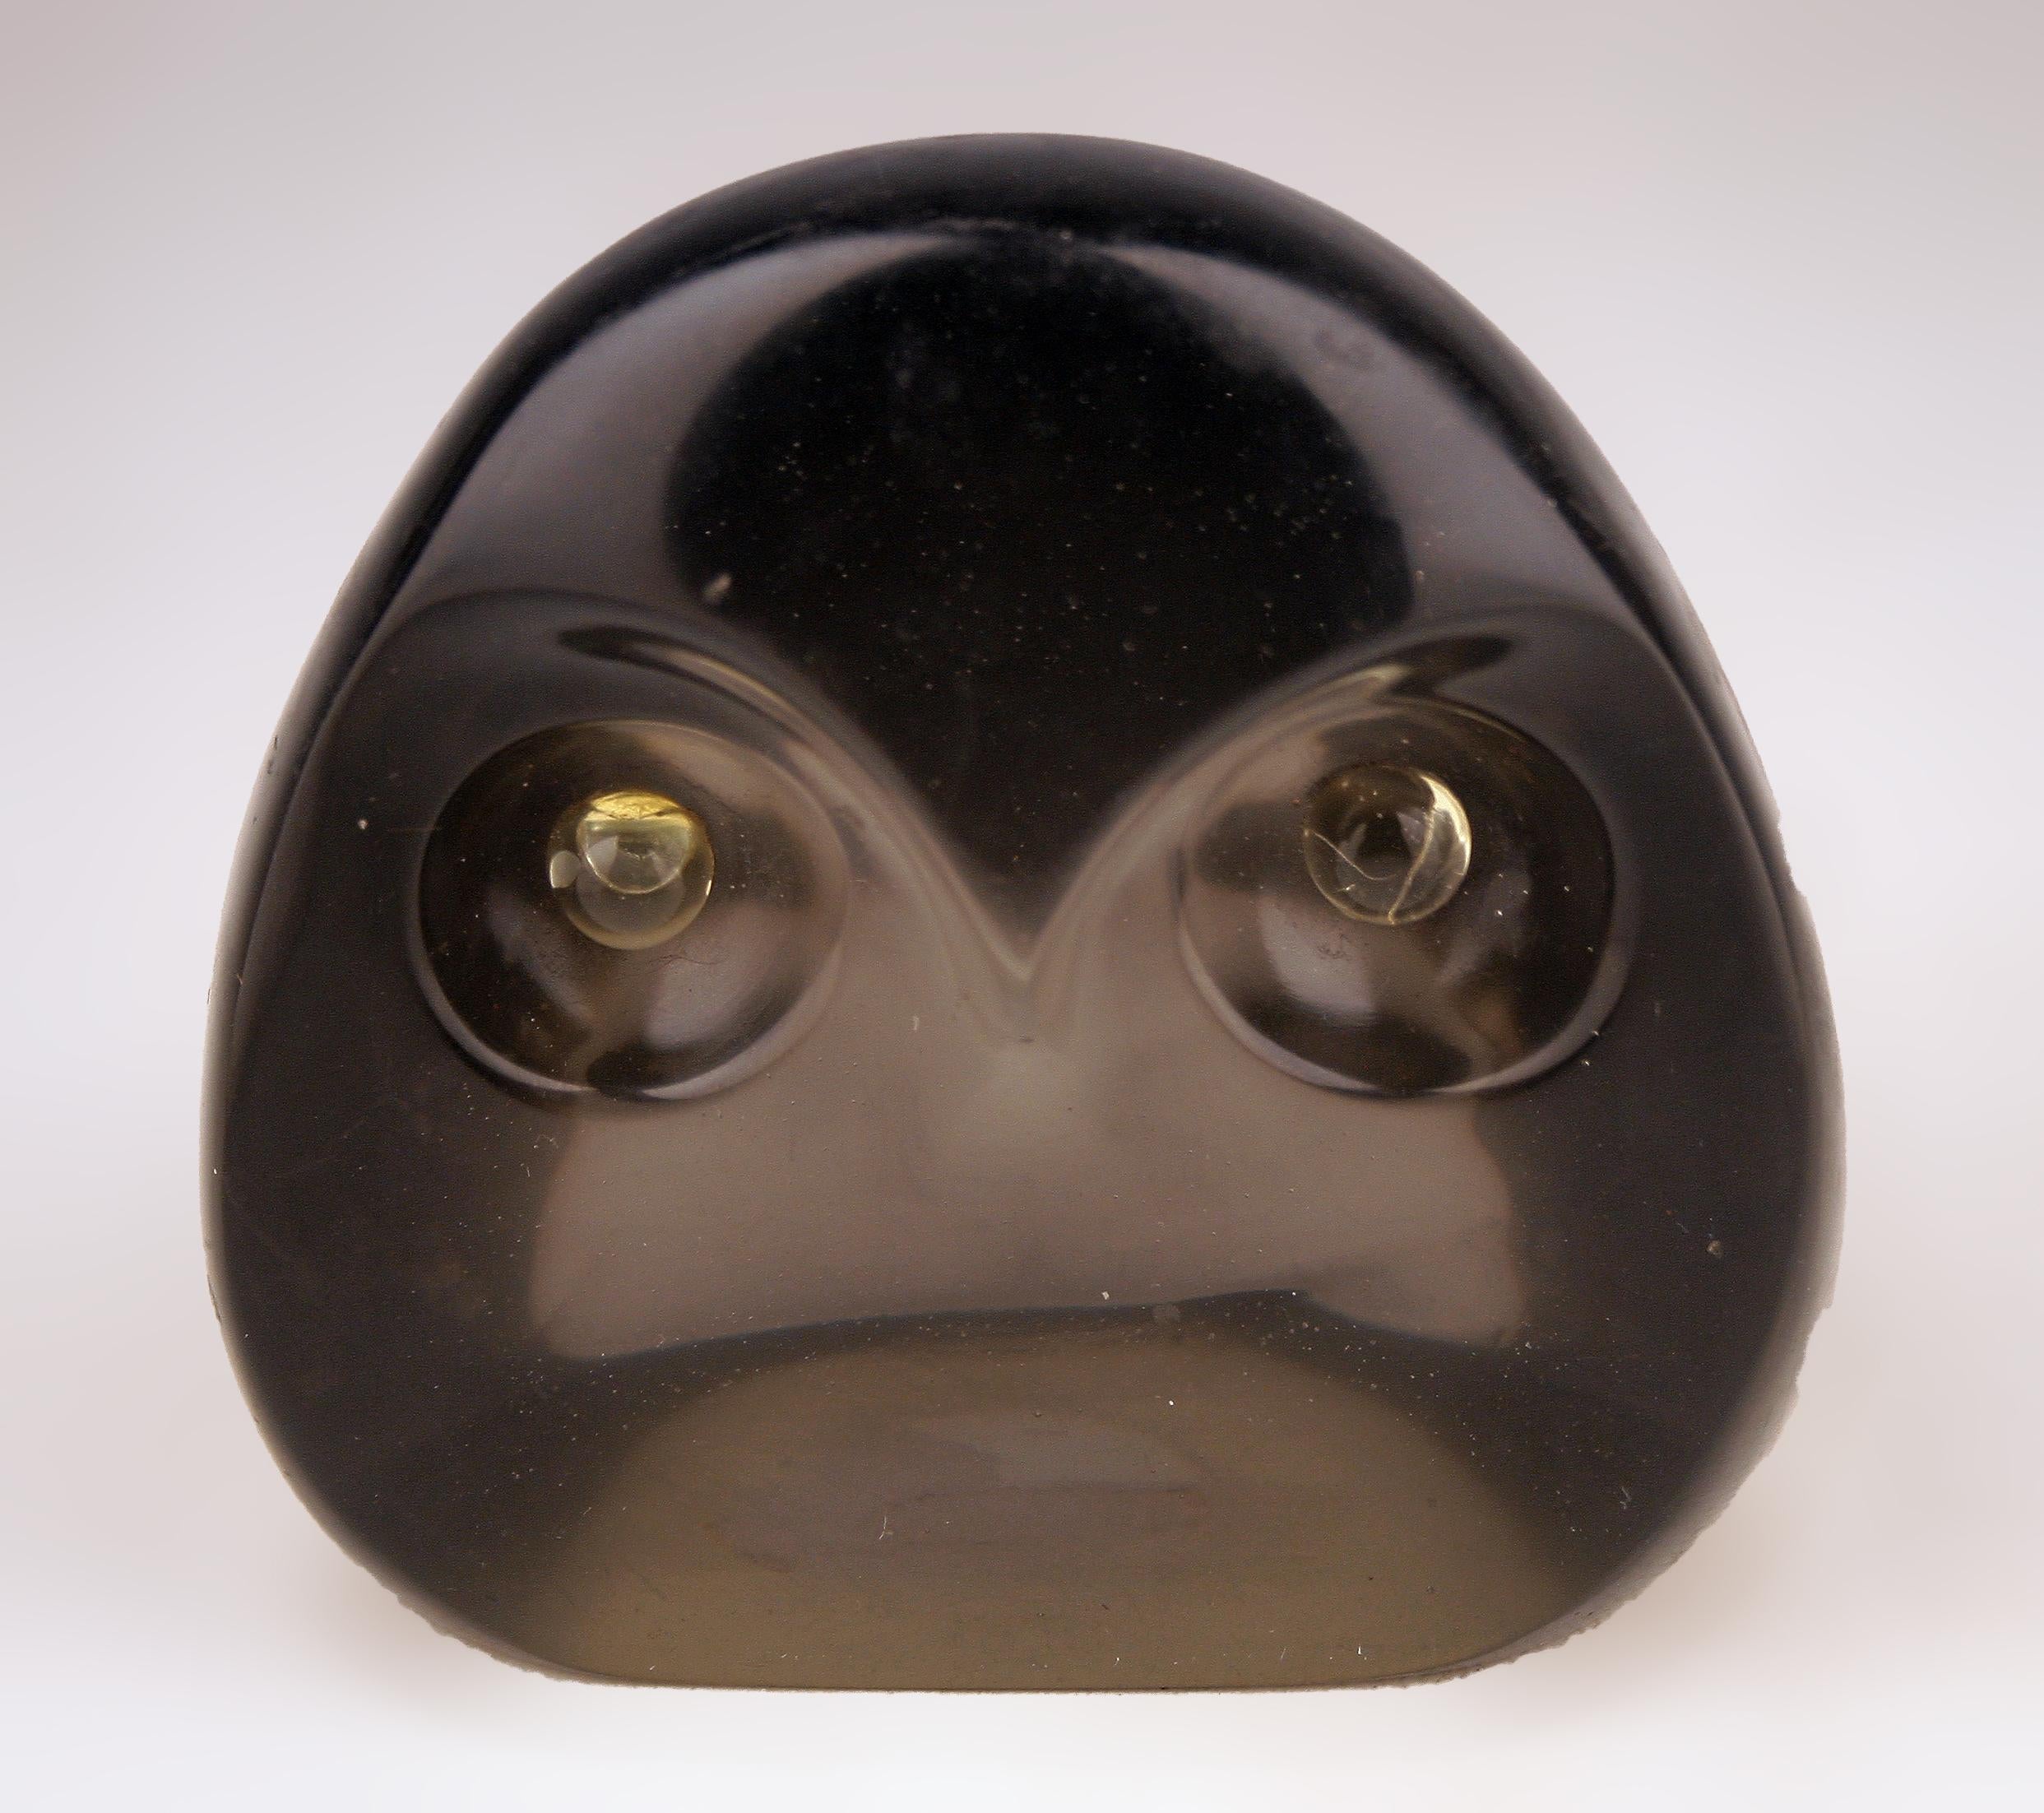 Cast Translucent Acrylic/Lucite Owl Sculpture/Paperweight by Aldemir Martins, Brazil For Sale